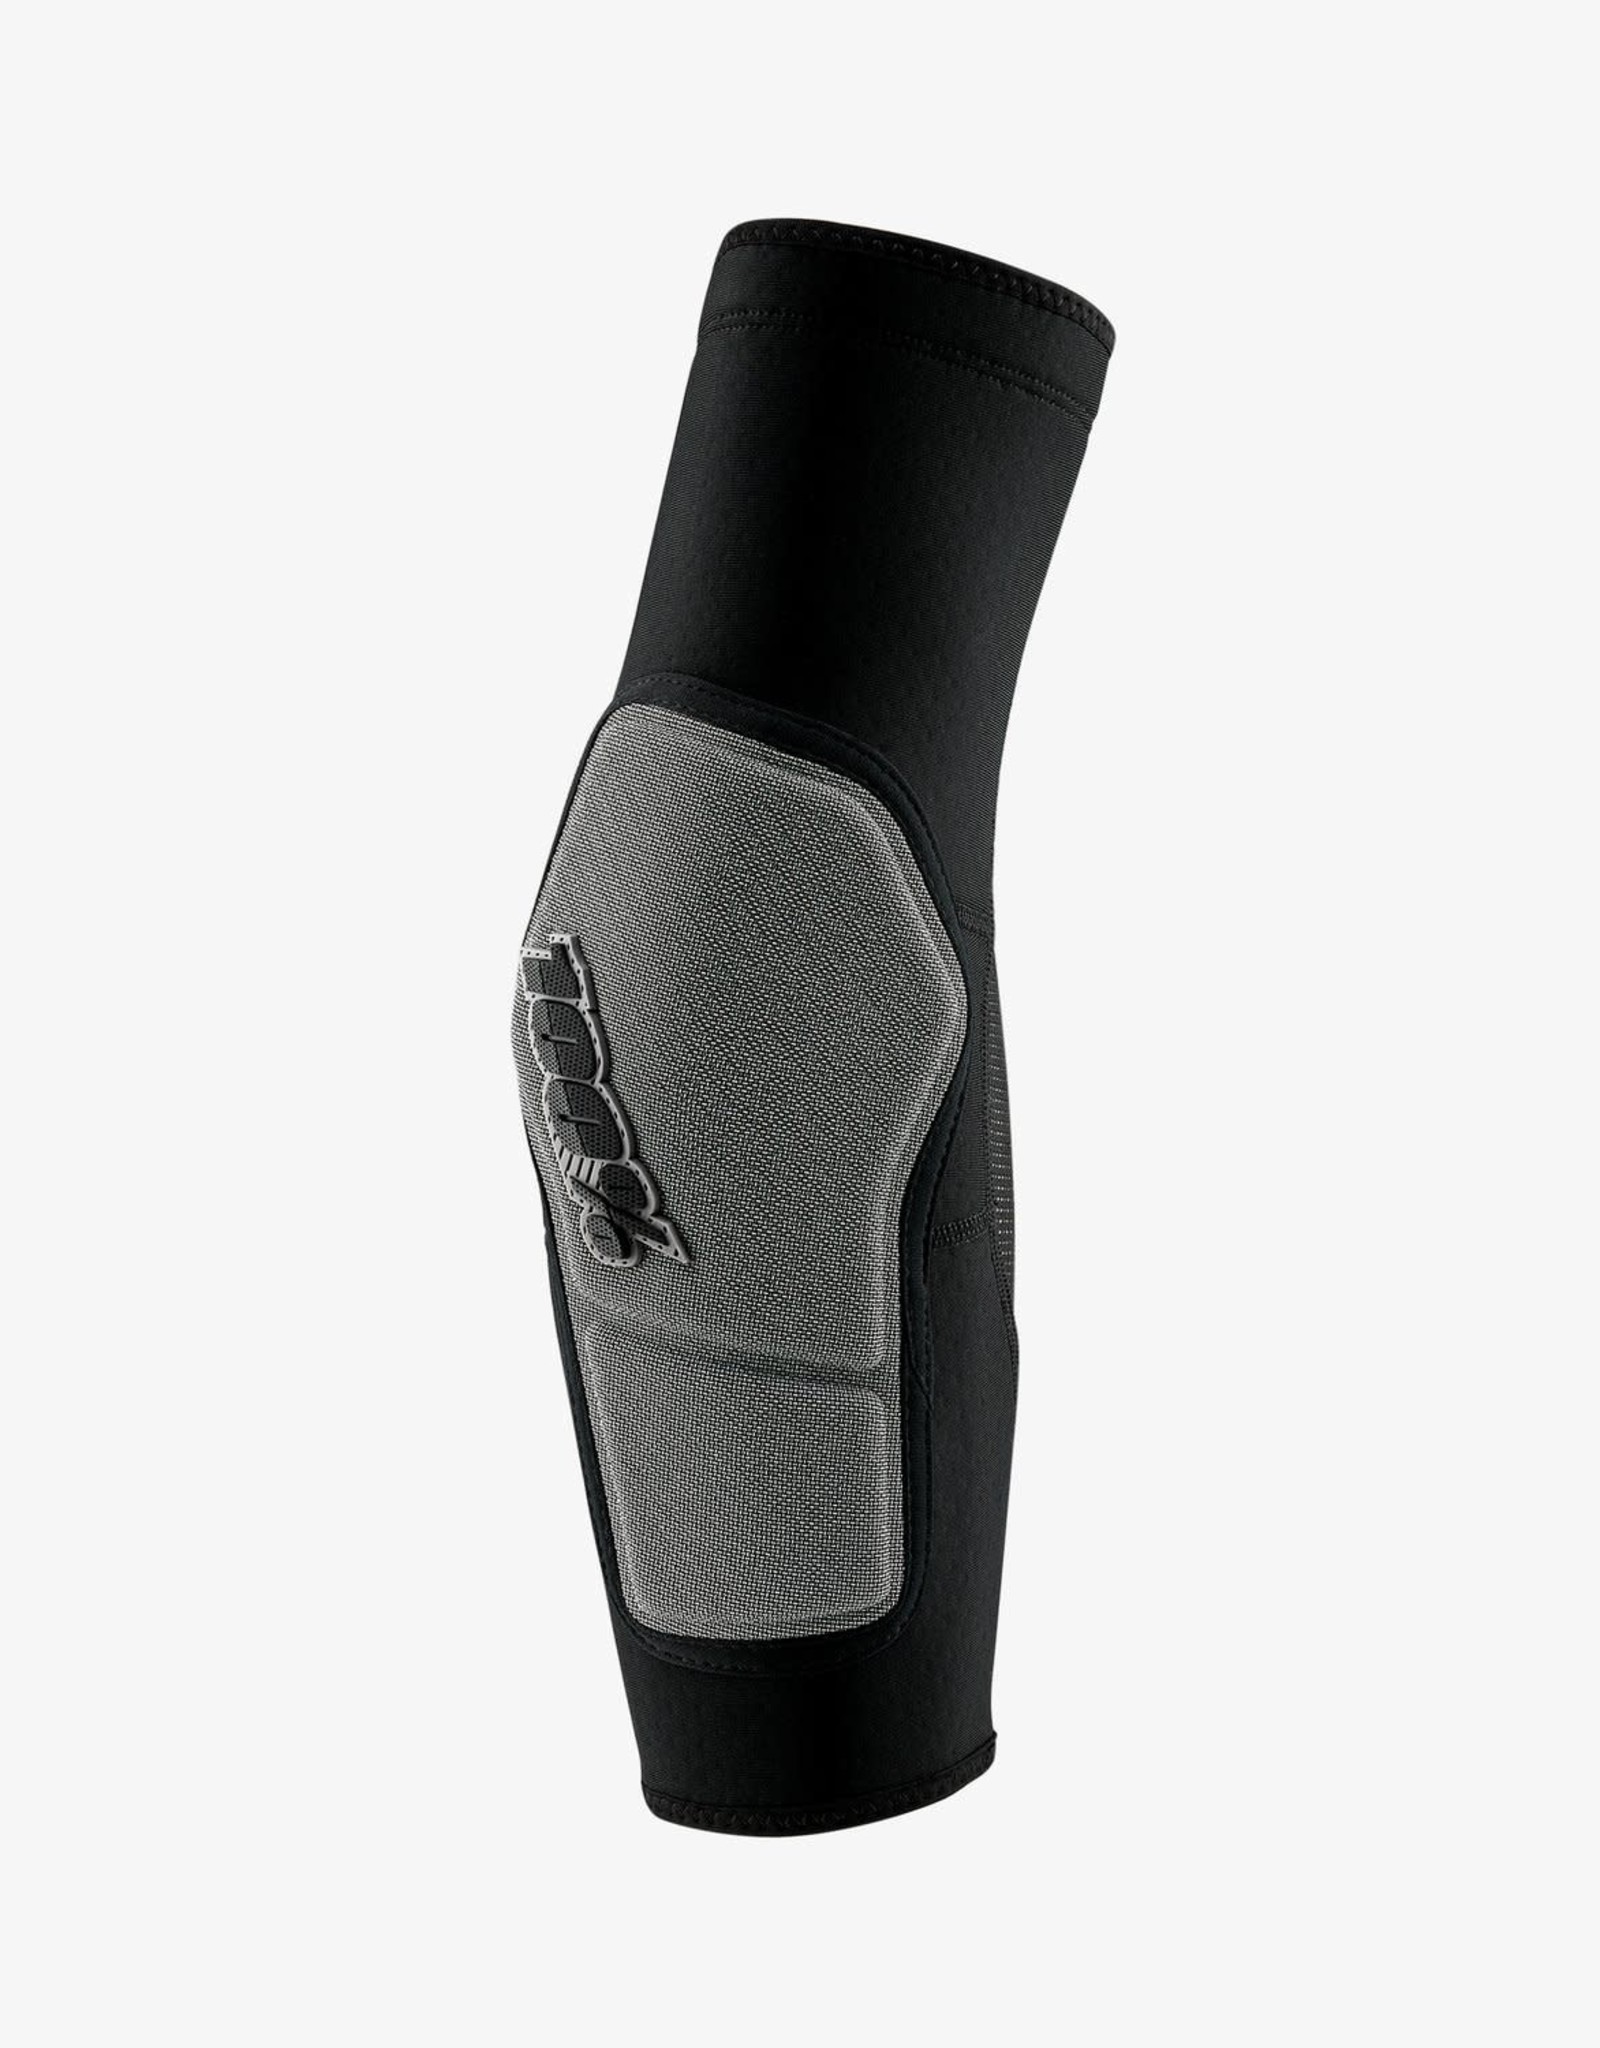 100% 100% RideCamp Elbow Guards